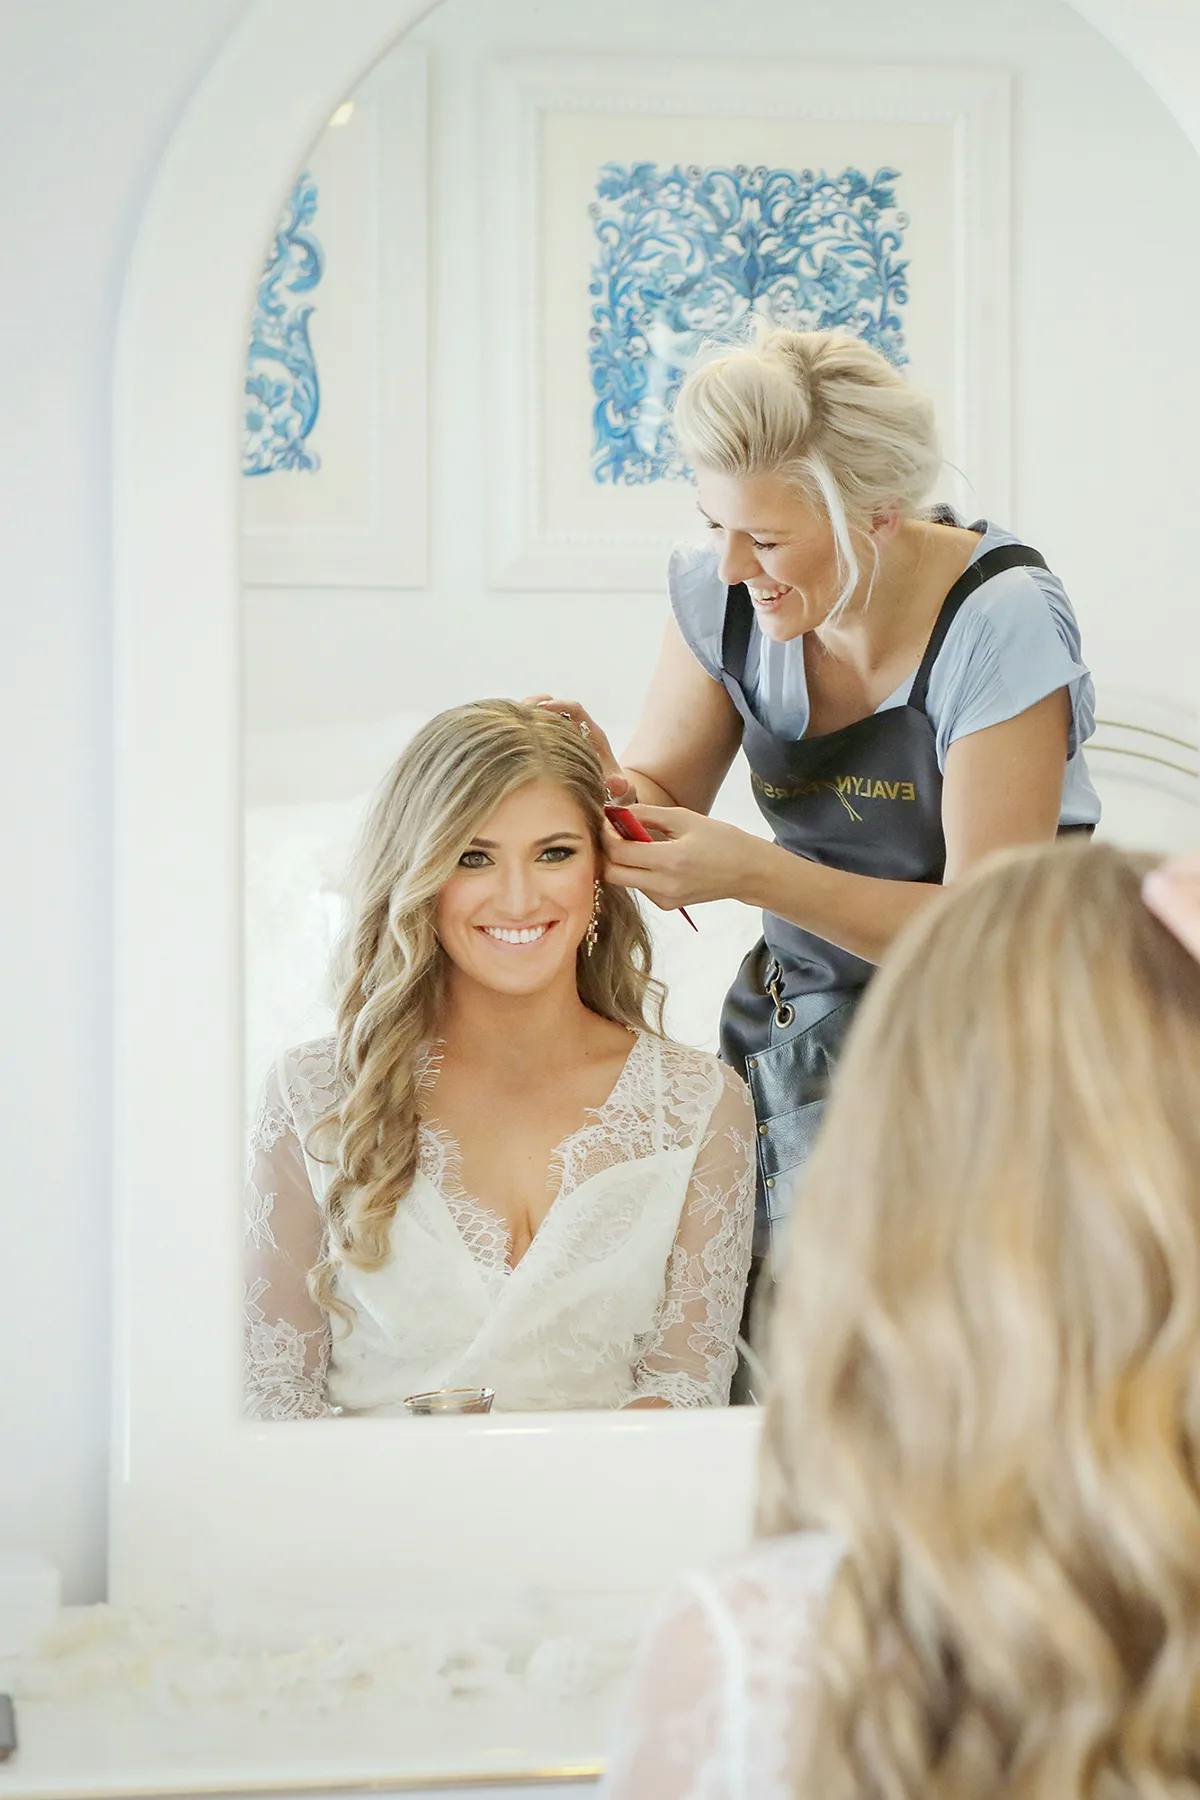 A smiling bride with long, wavy blonde hair and a lace bridal gown sits in front of a mirror. A hairstylist stands behind her, styling her hair with a curling iron. The reflection captures the happy moment in a bright, white room with elegant decorations.